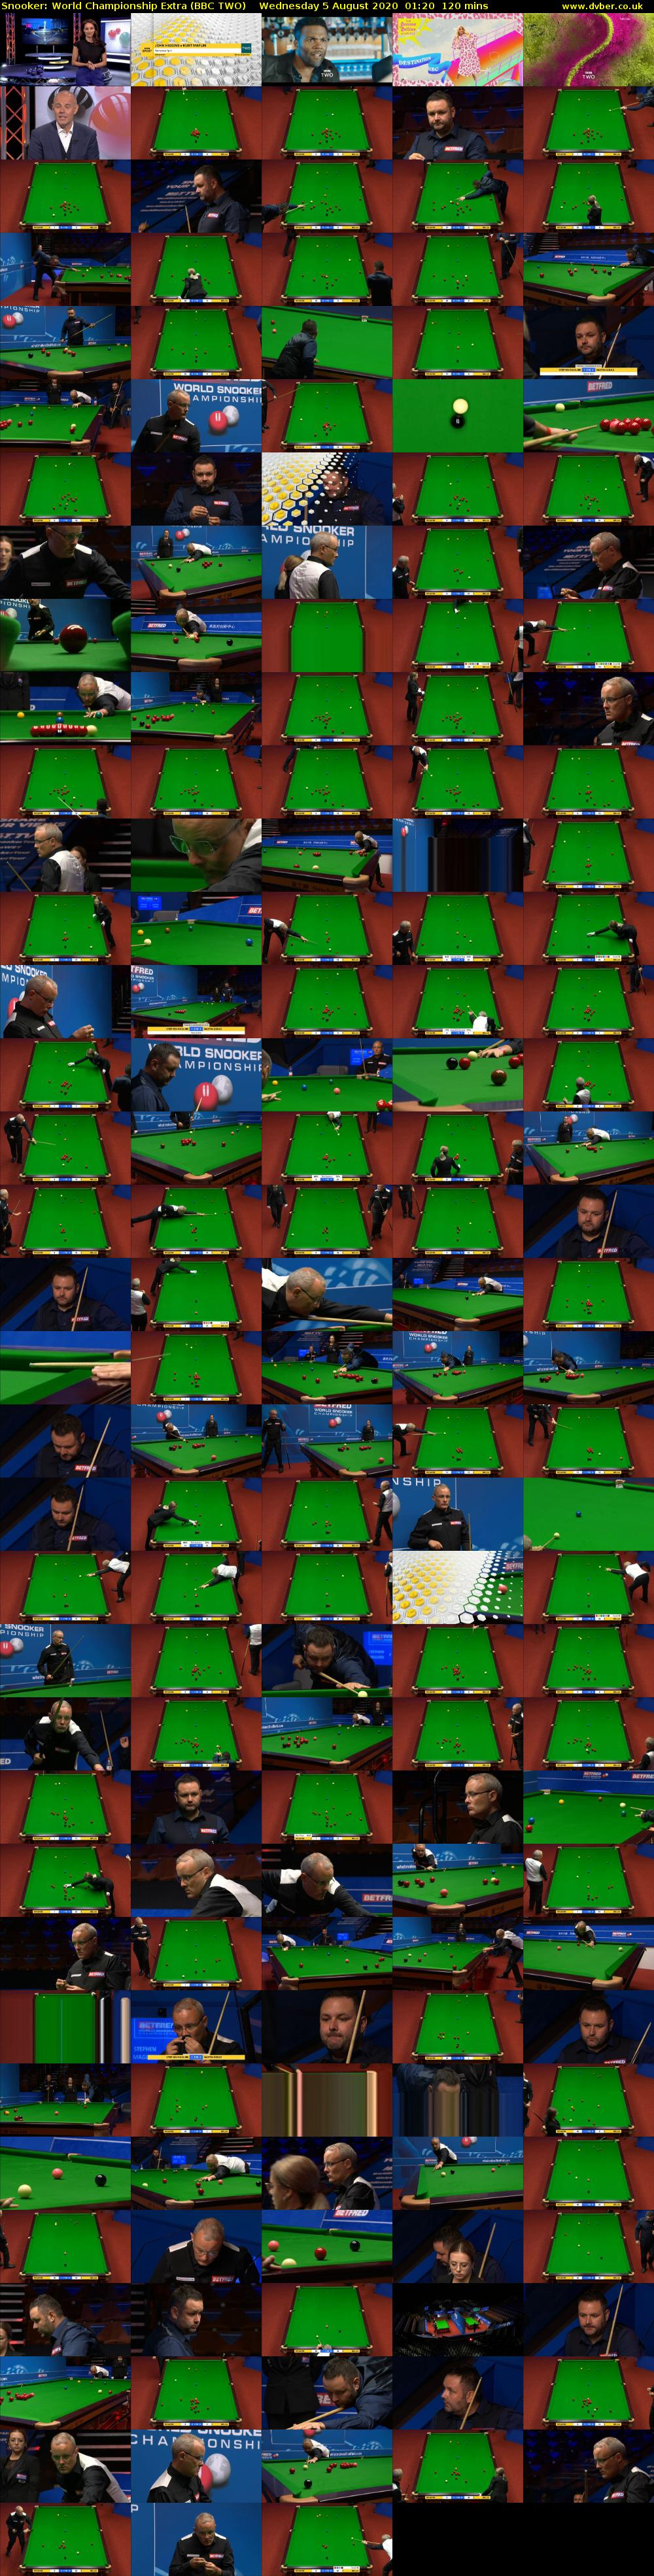 Snooker: World Championship Extra (BBC TWO) Wednesday 5 August 2020 01:20 - 03:20